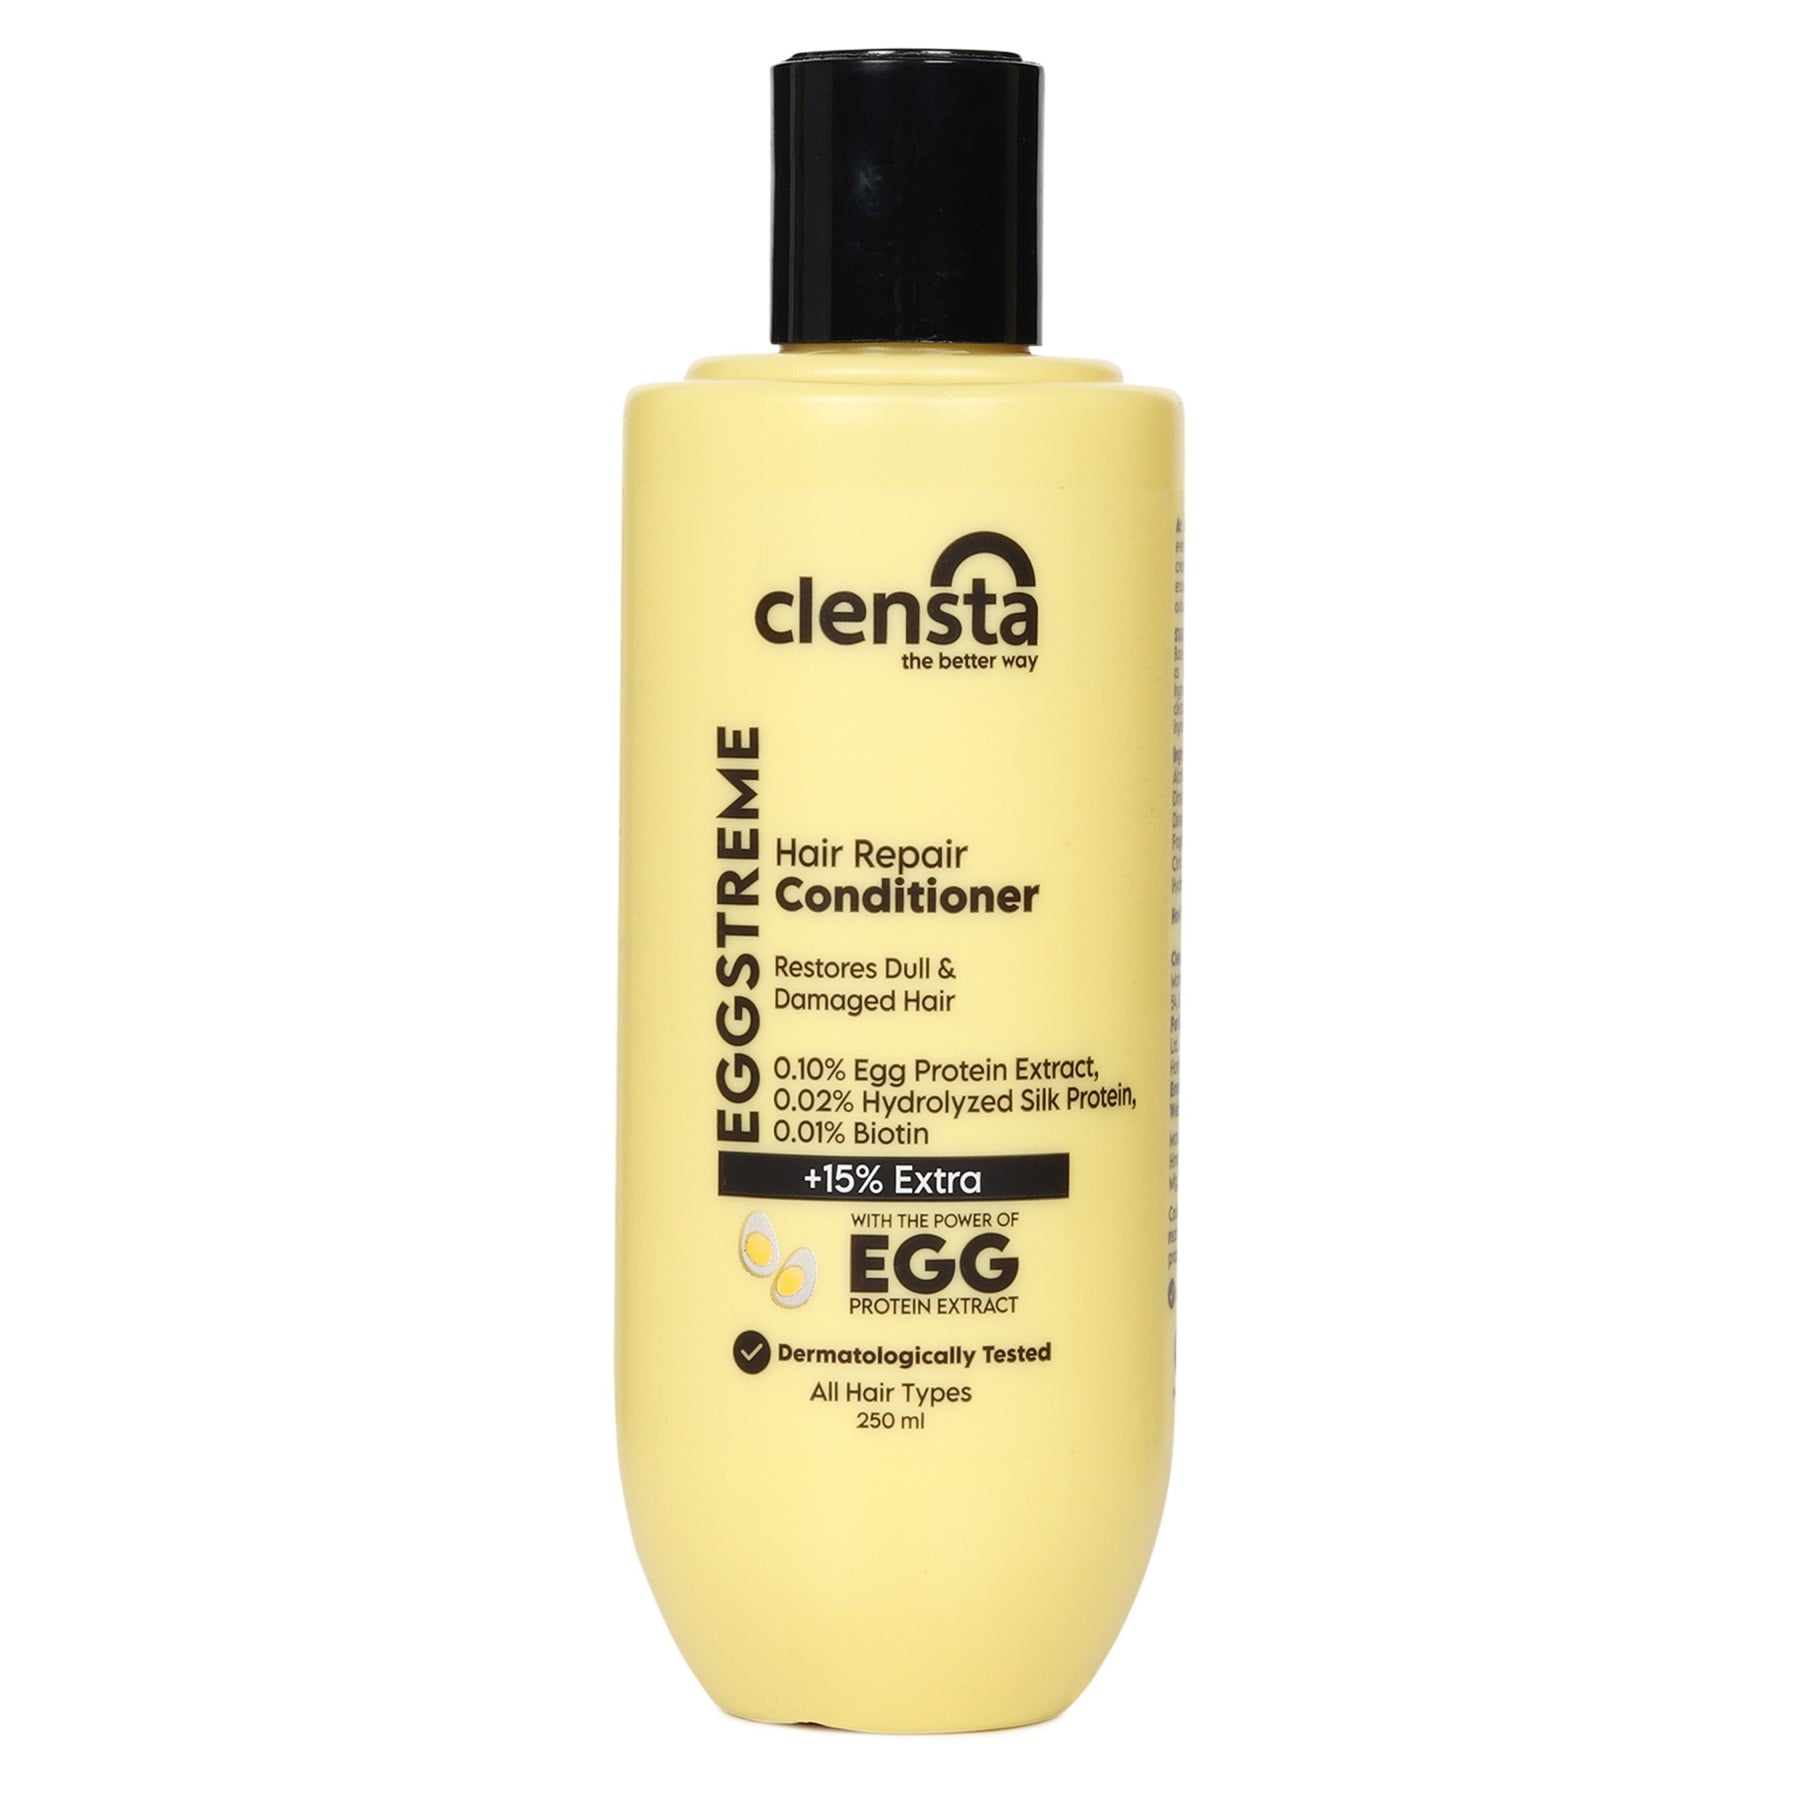 Eggstreme Hair Repair Conditioner with 0.10% Egg Protein Extract, 0.02% Hydrolyzed Silk Protein, 0.01% Biotin